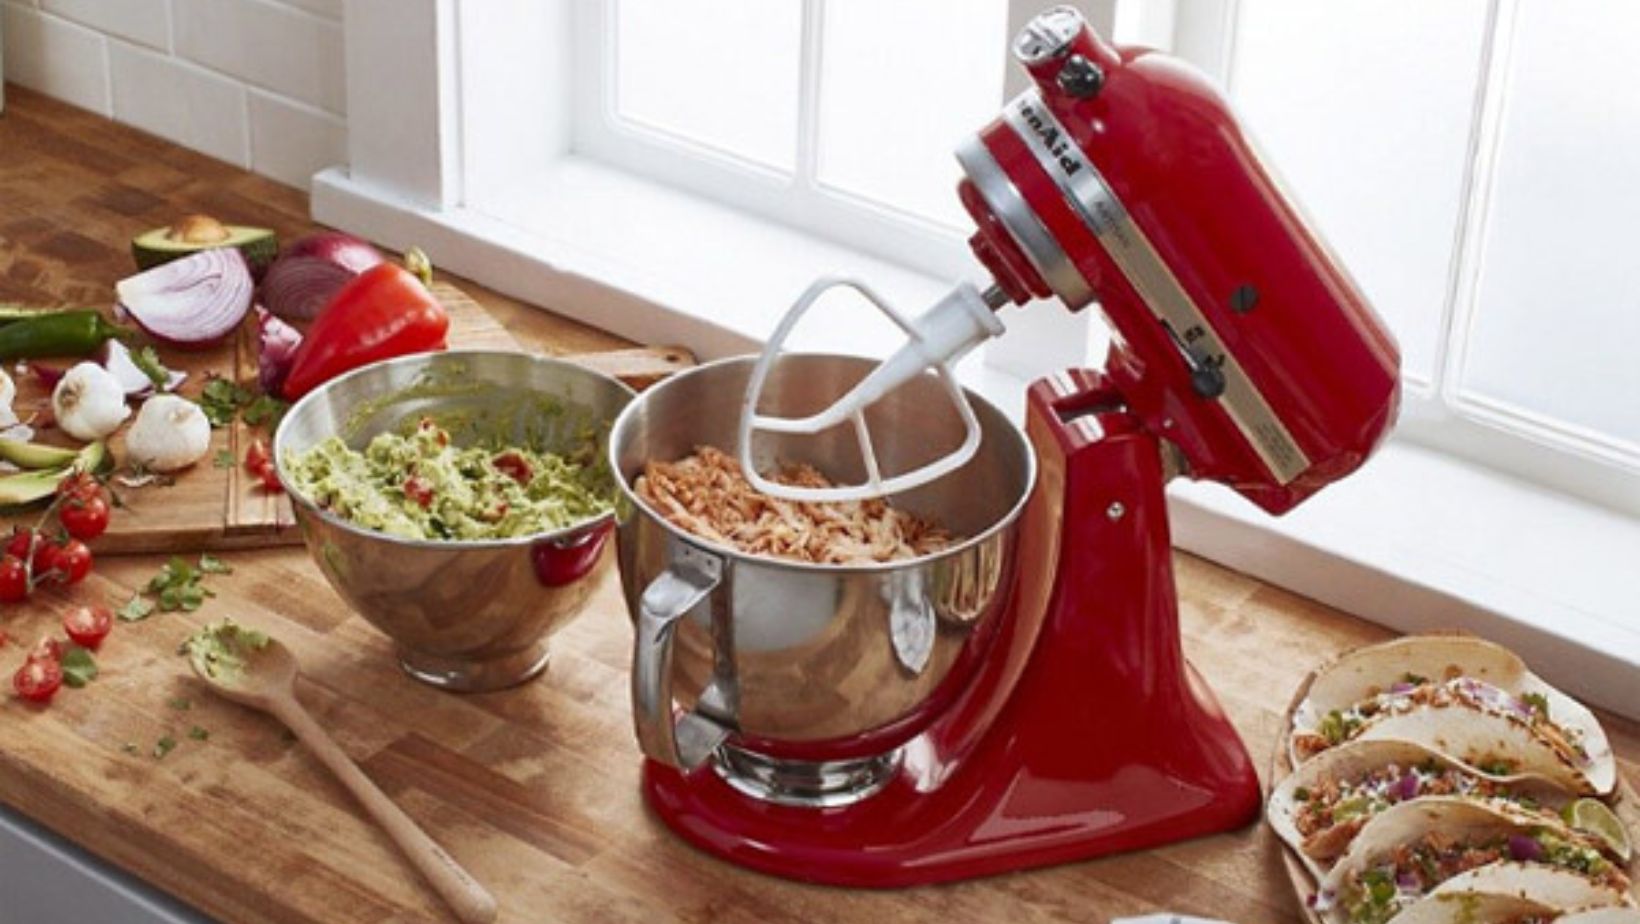 red KitchenAid stand mixer on a wooden counter next to a plate of tacos